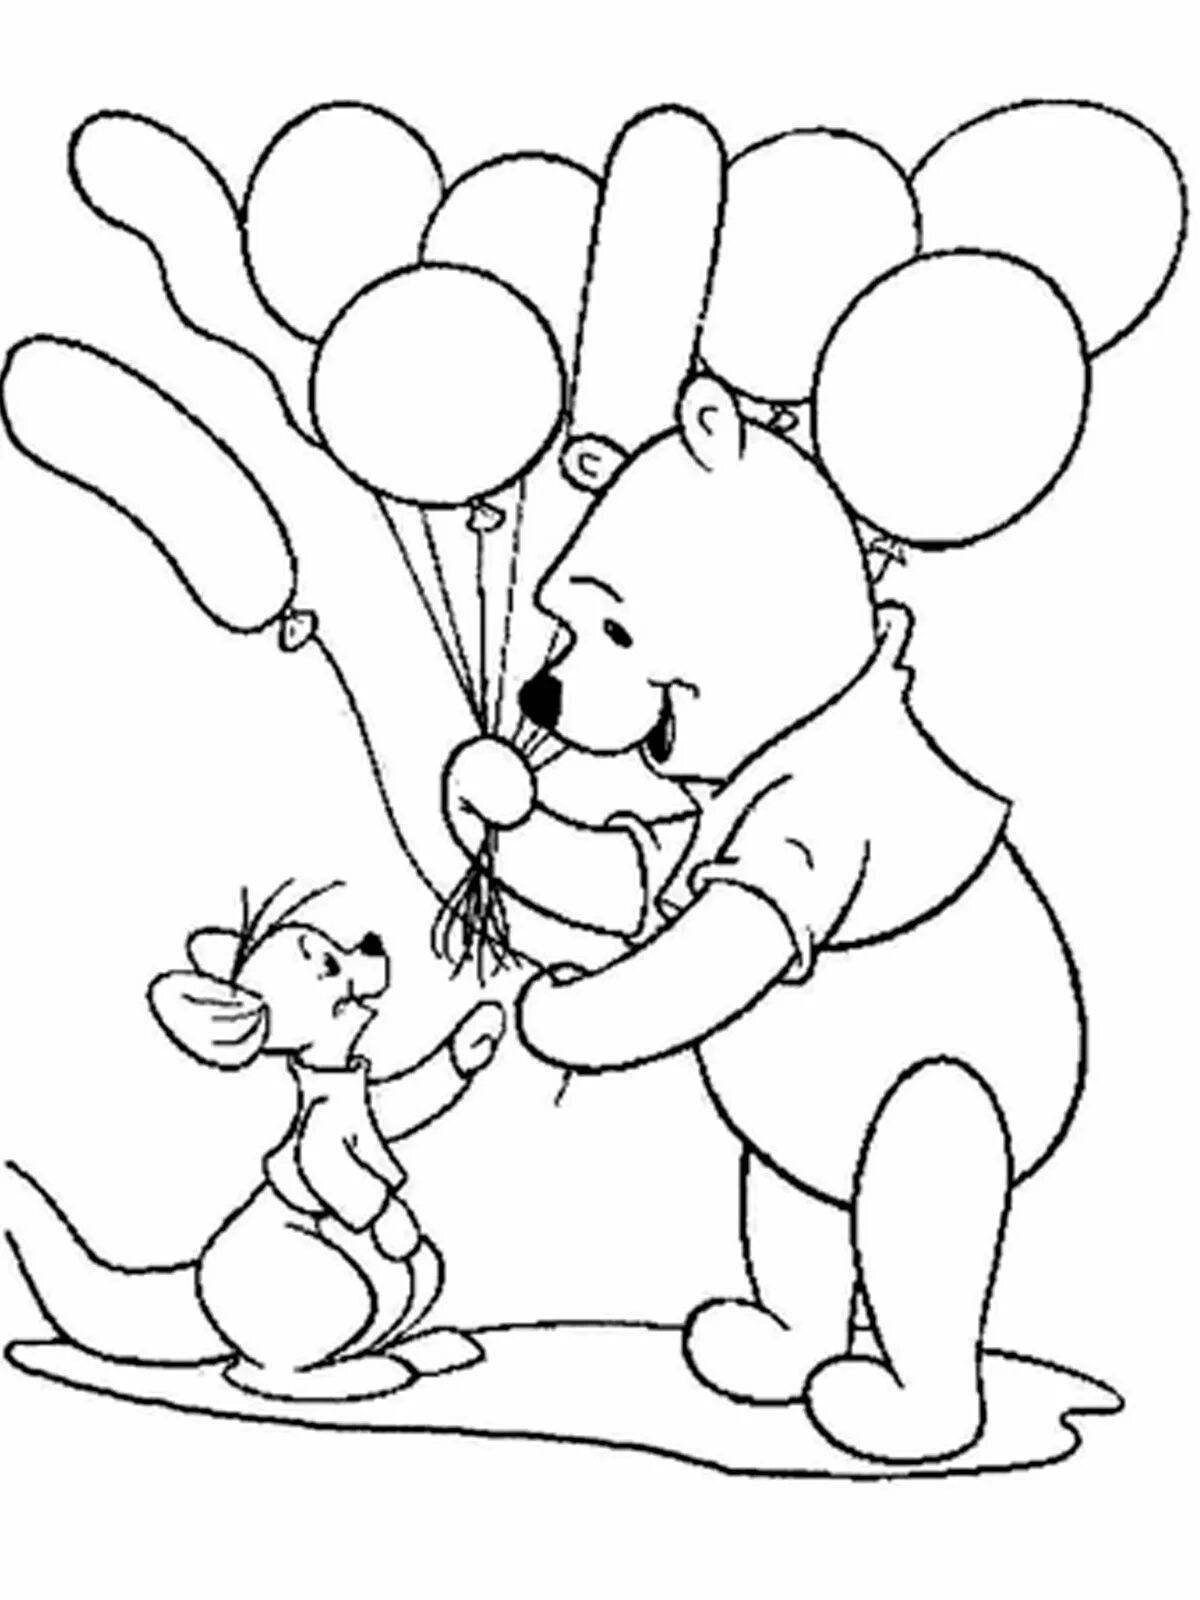 Winnie the pooh with balloon #9